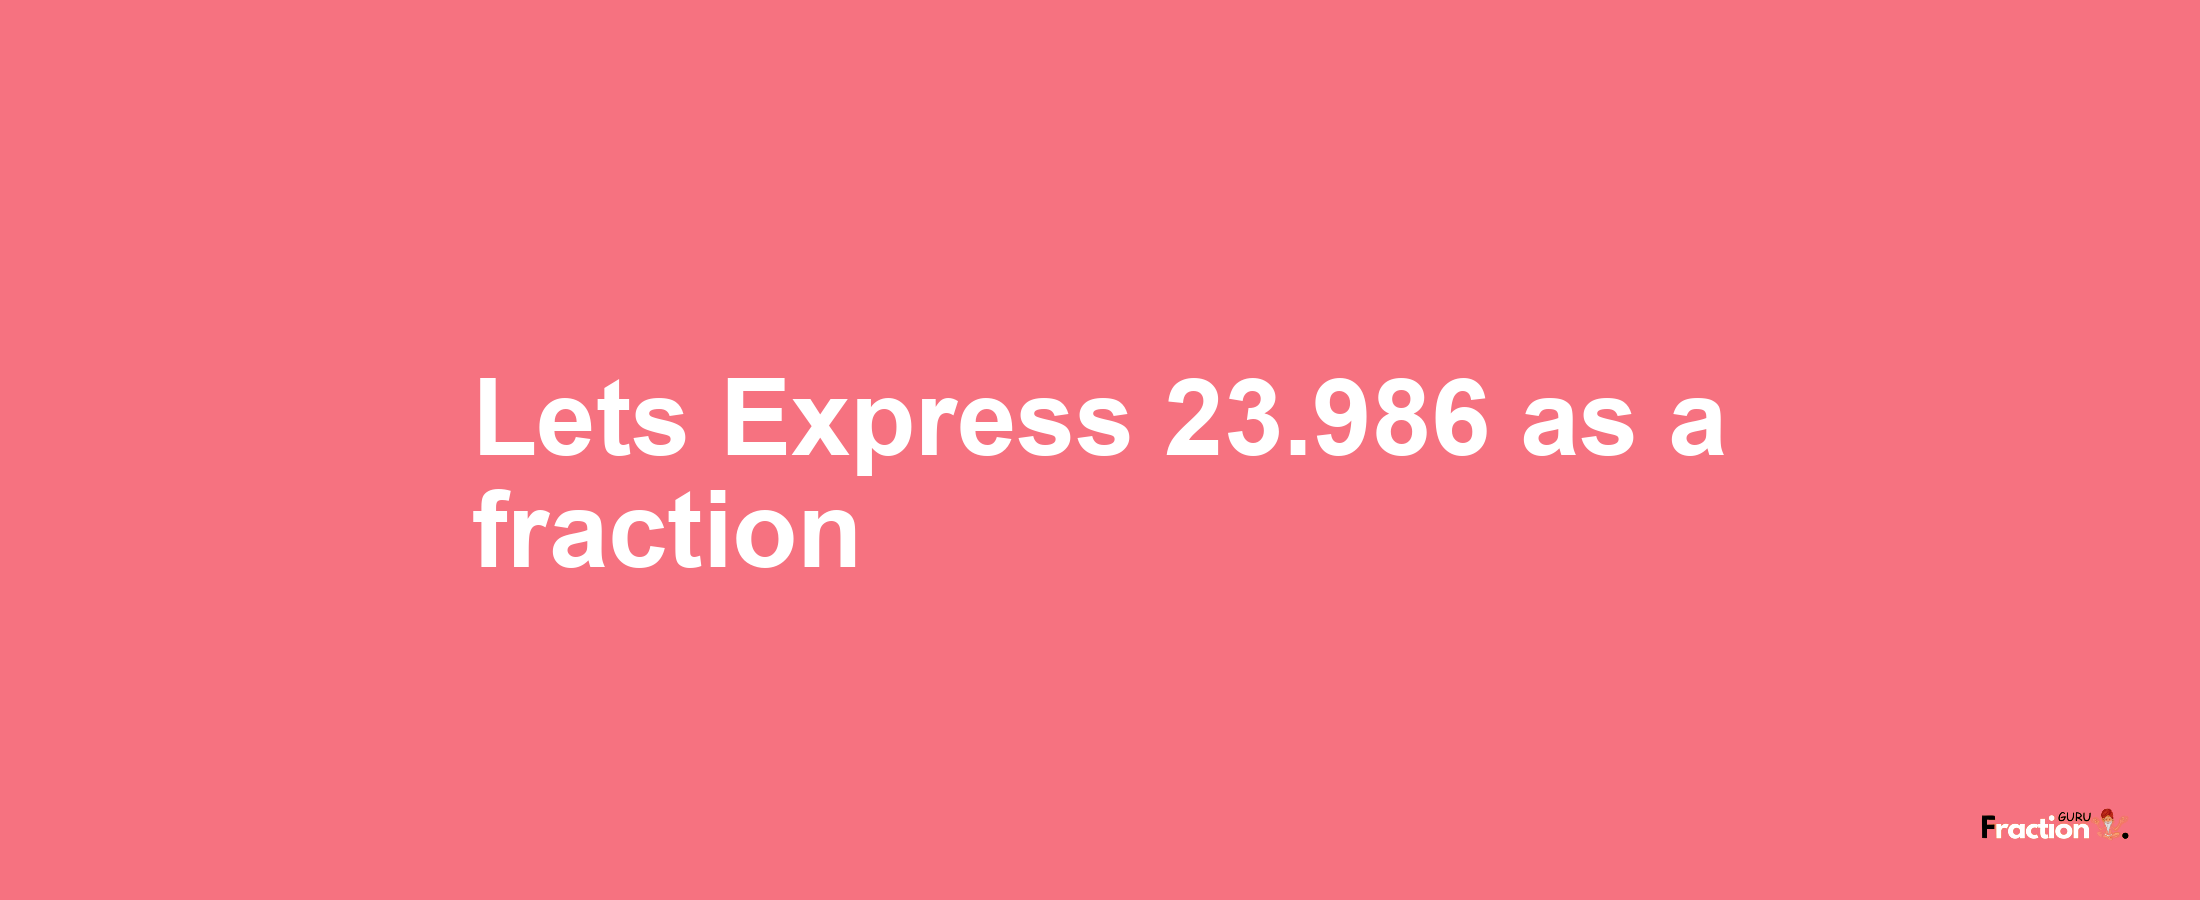 Lets Express 23.986 as afraction